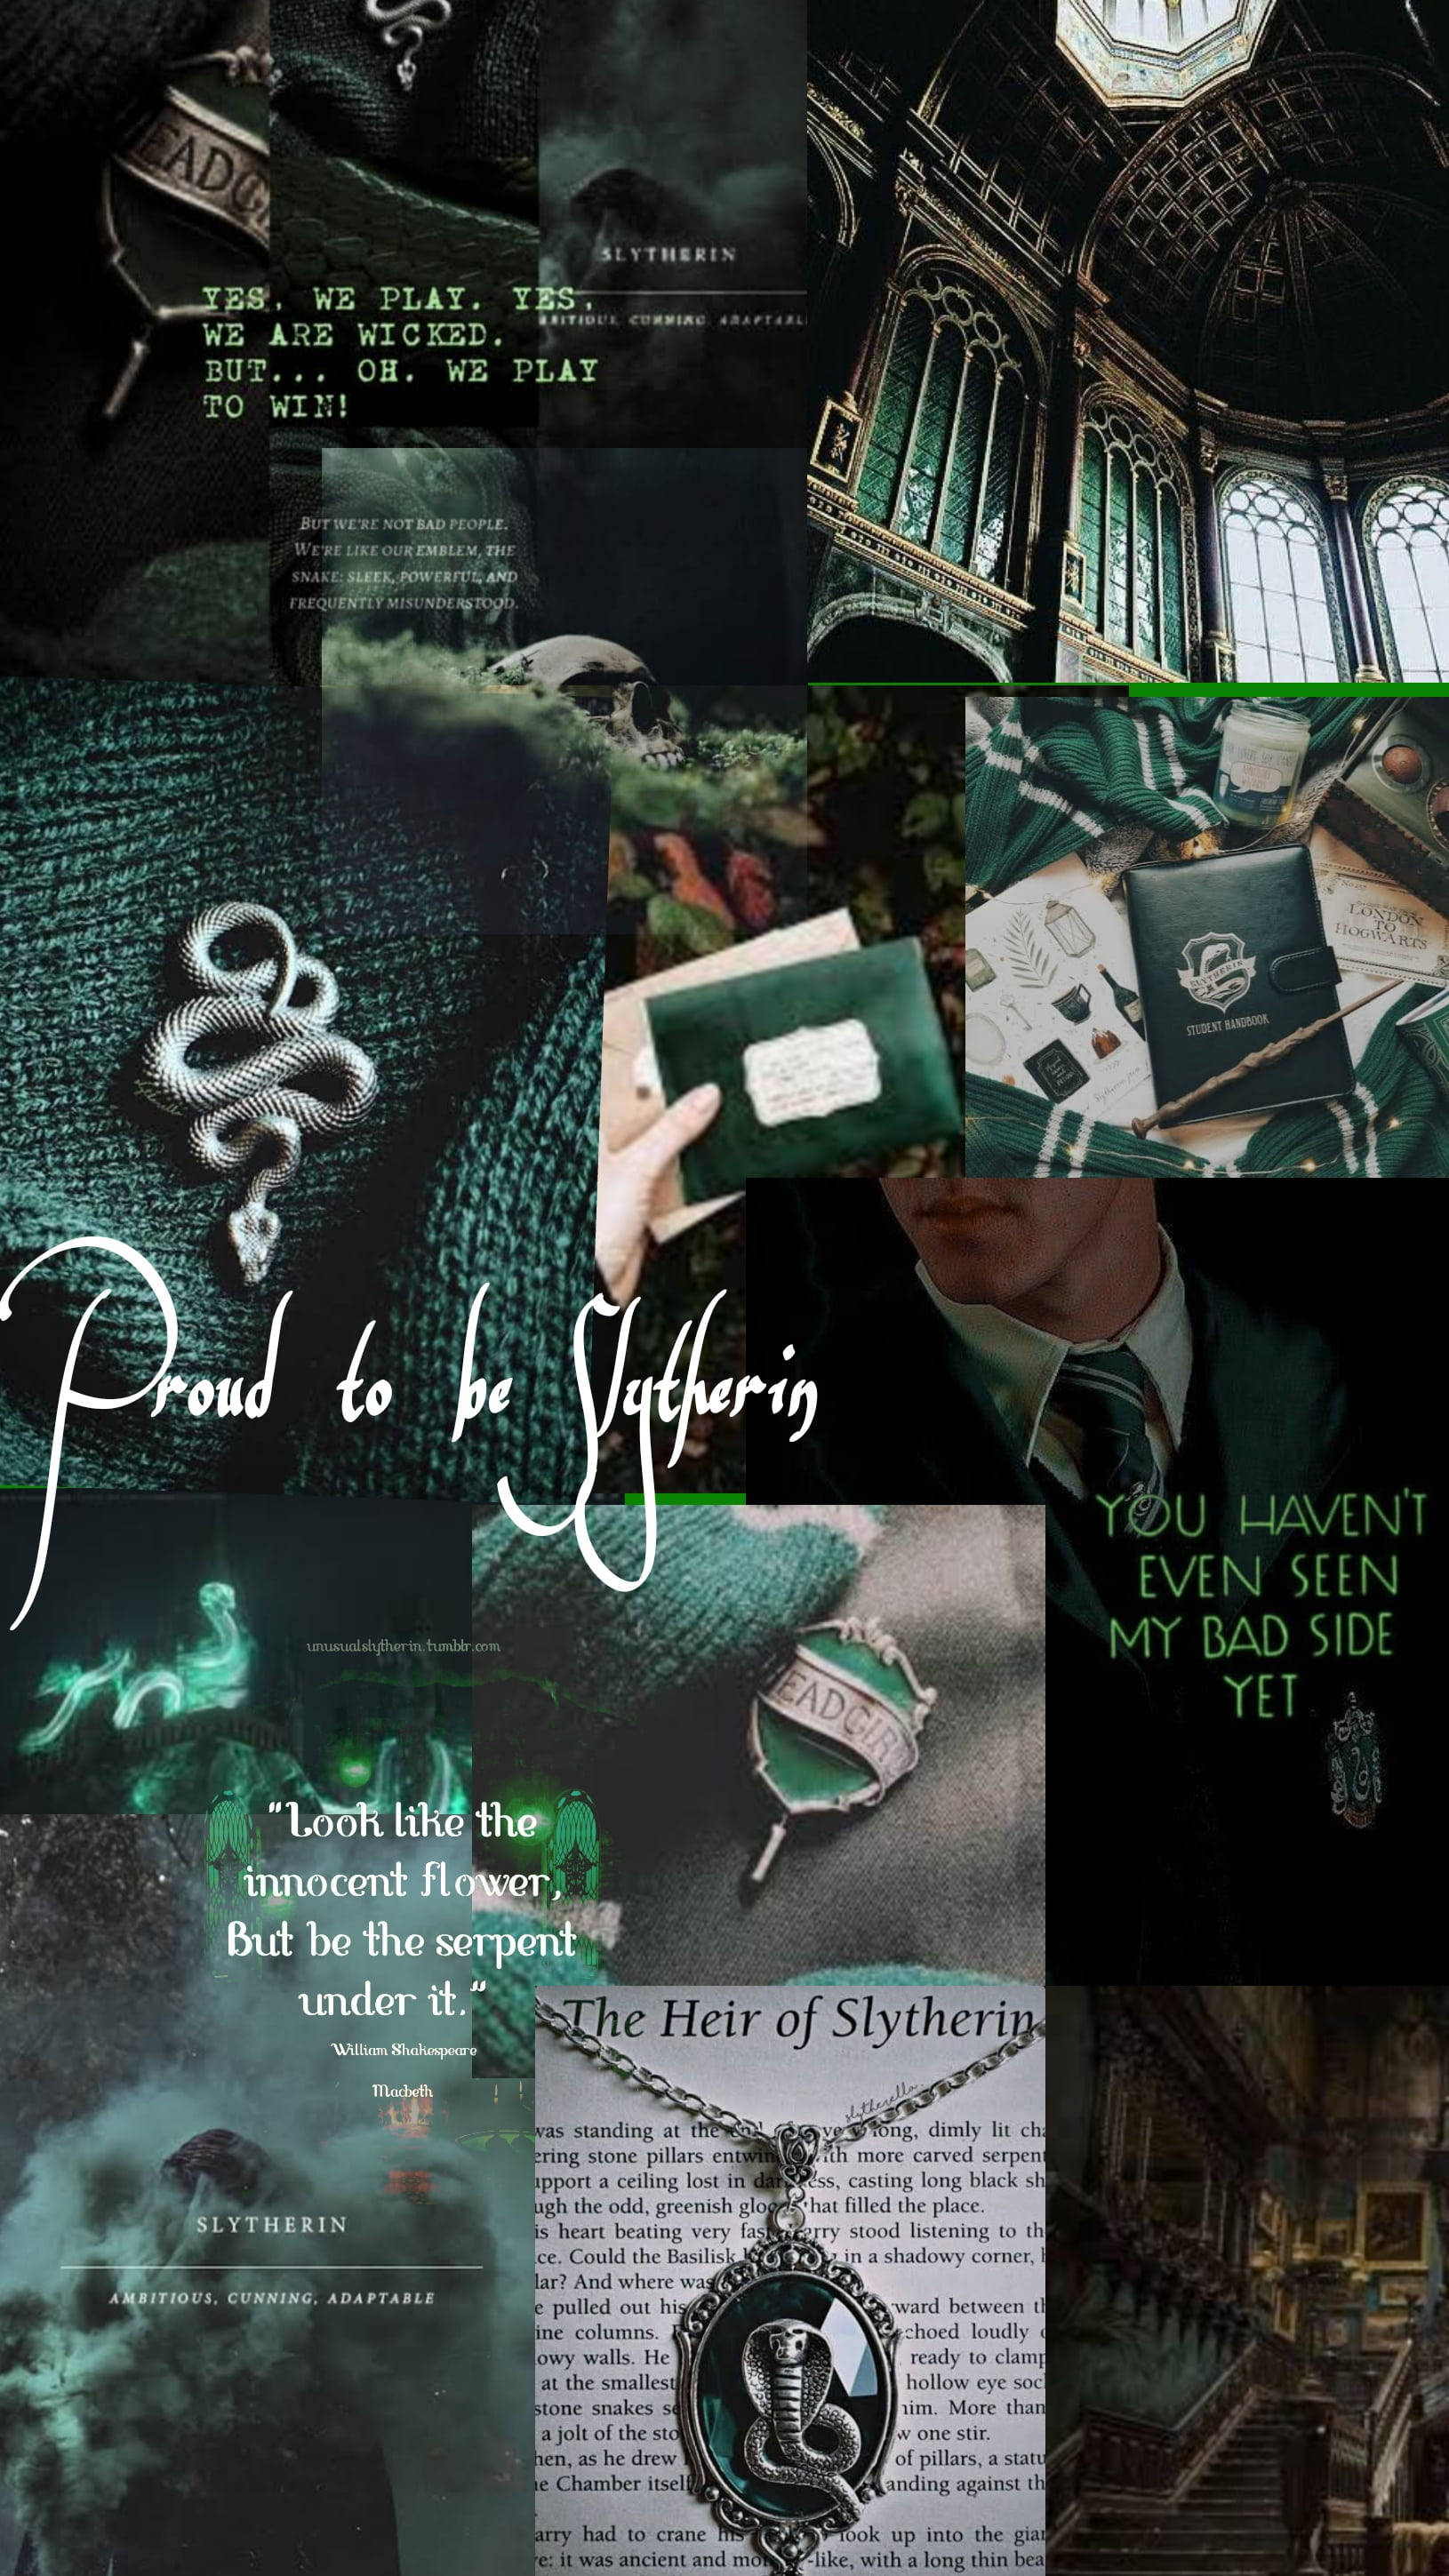 Harry Potter collage with images of Hogwarts and the Sorting Hat. - Harry Potter, Slytherin